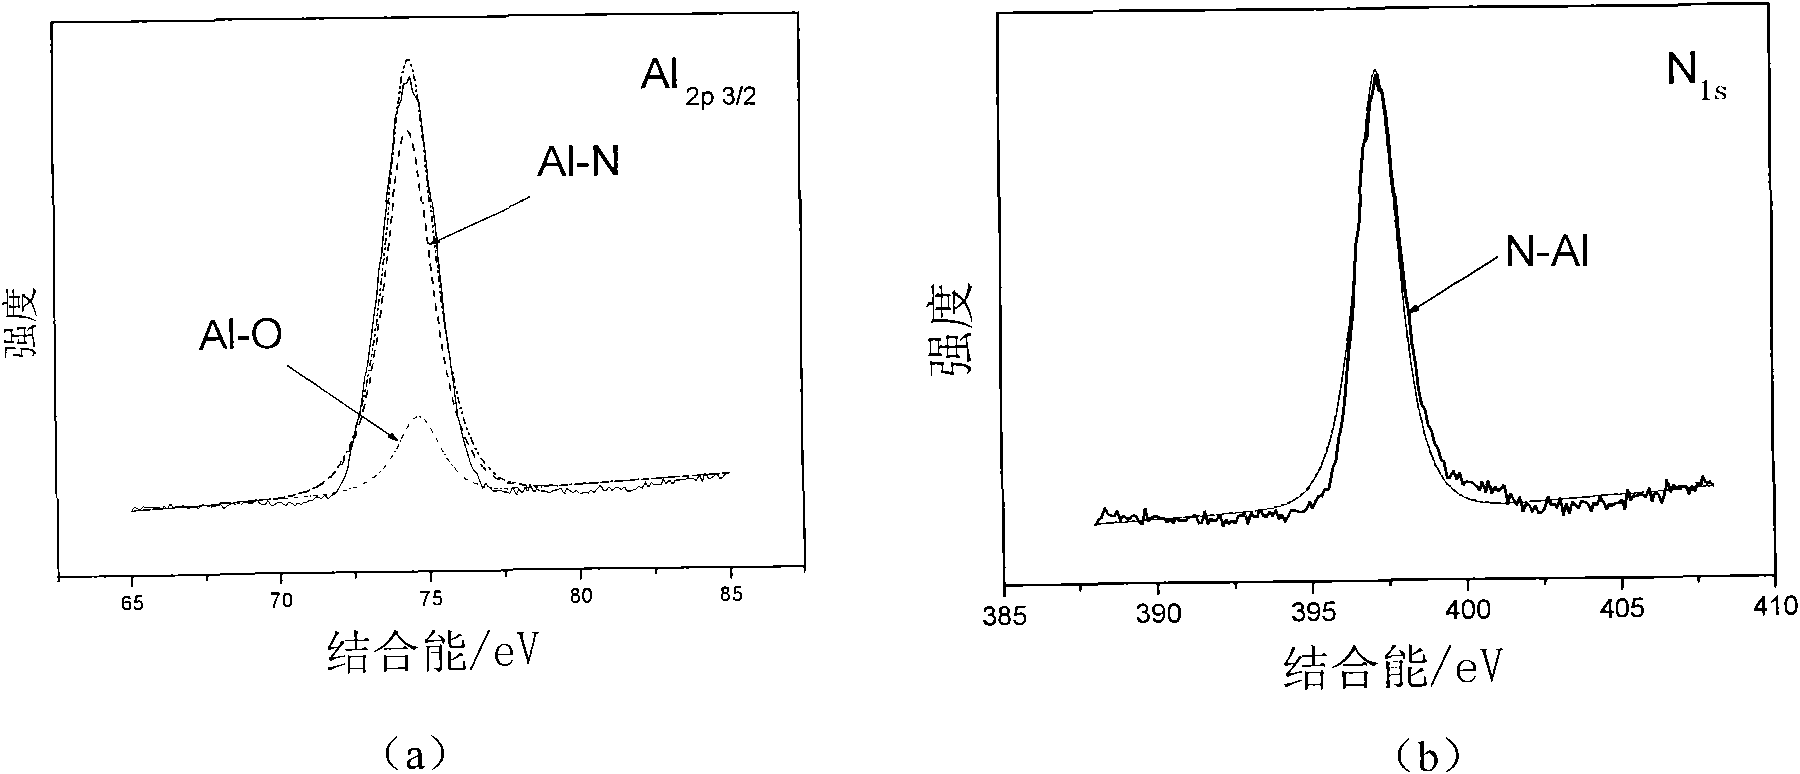 Deposition method capable of enhancing preferred orientation growth of AlN film